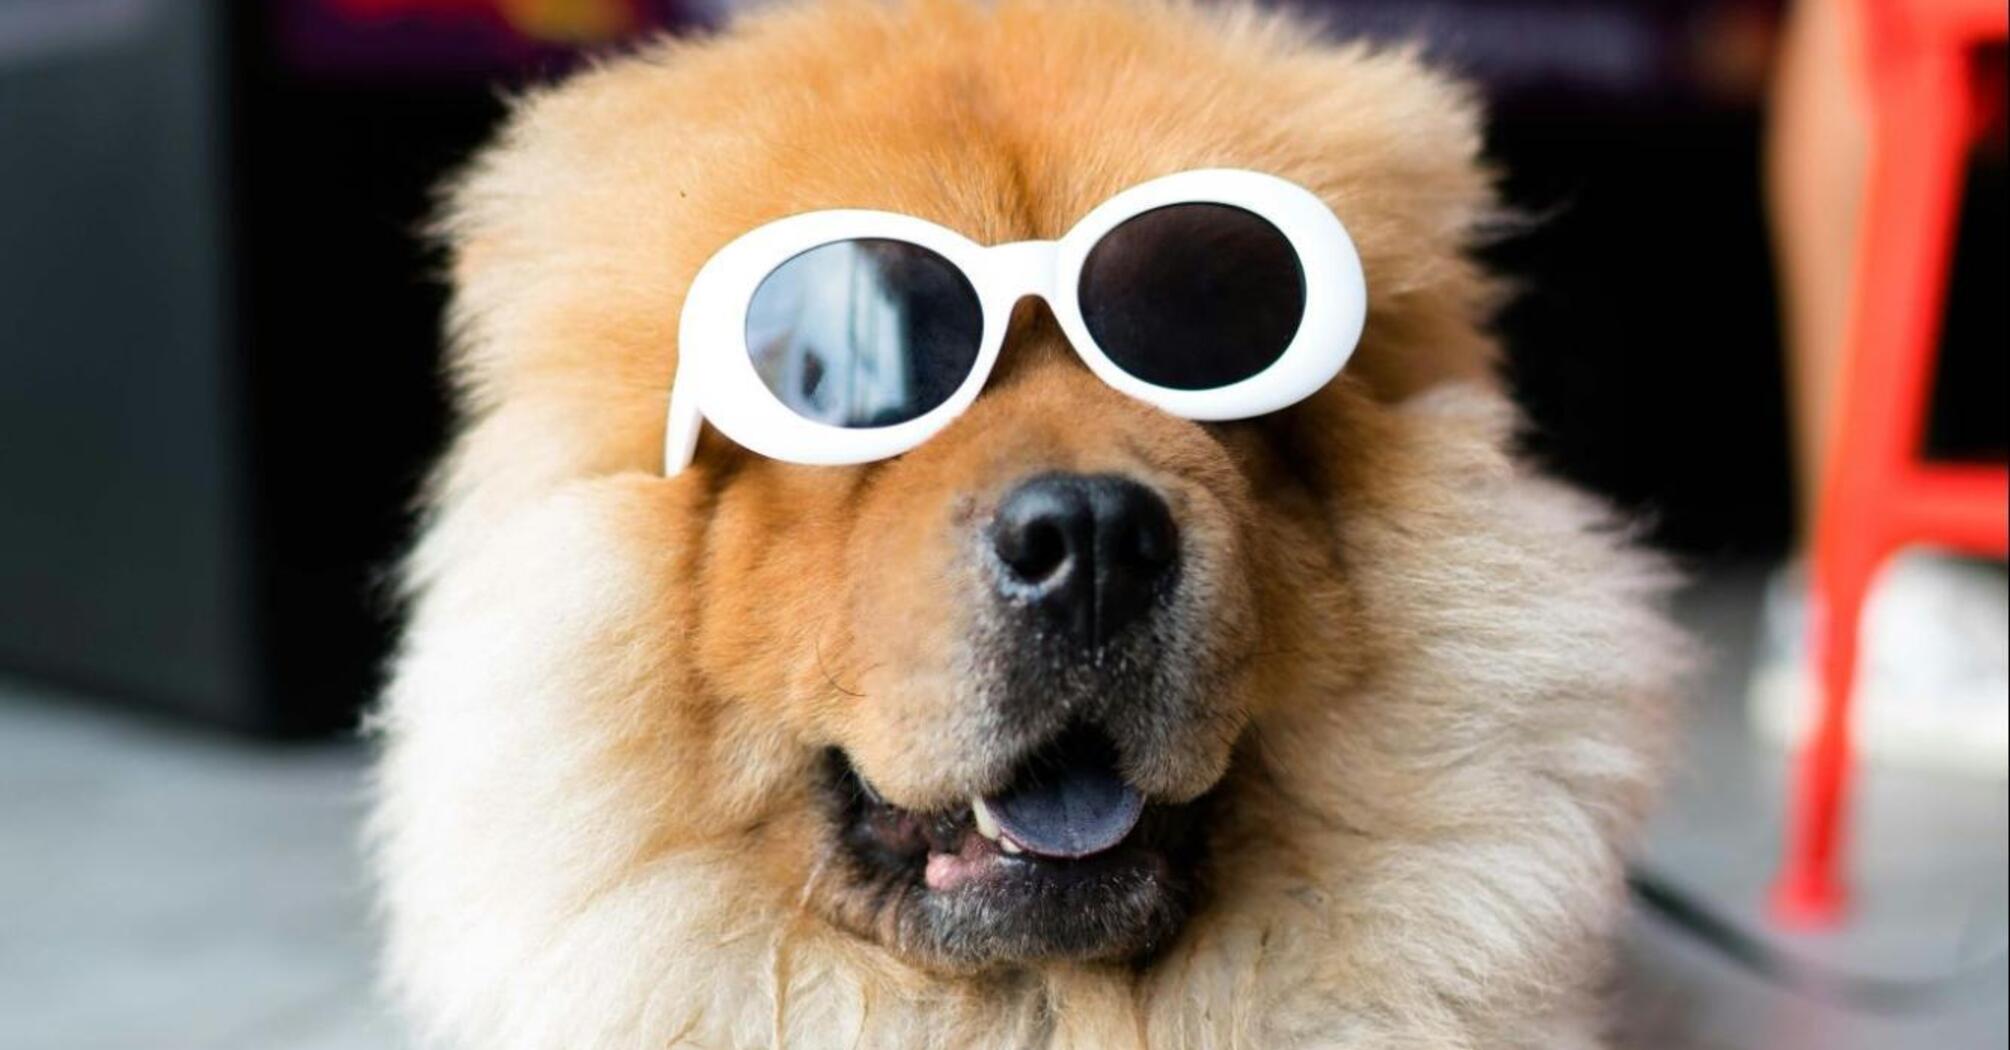 Dog wearing sunglasses in the caffe